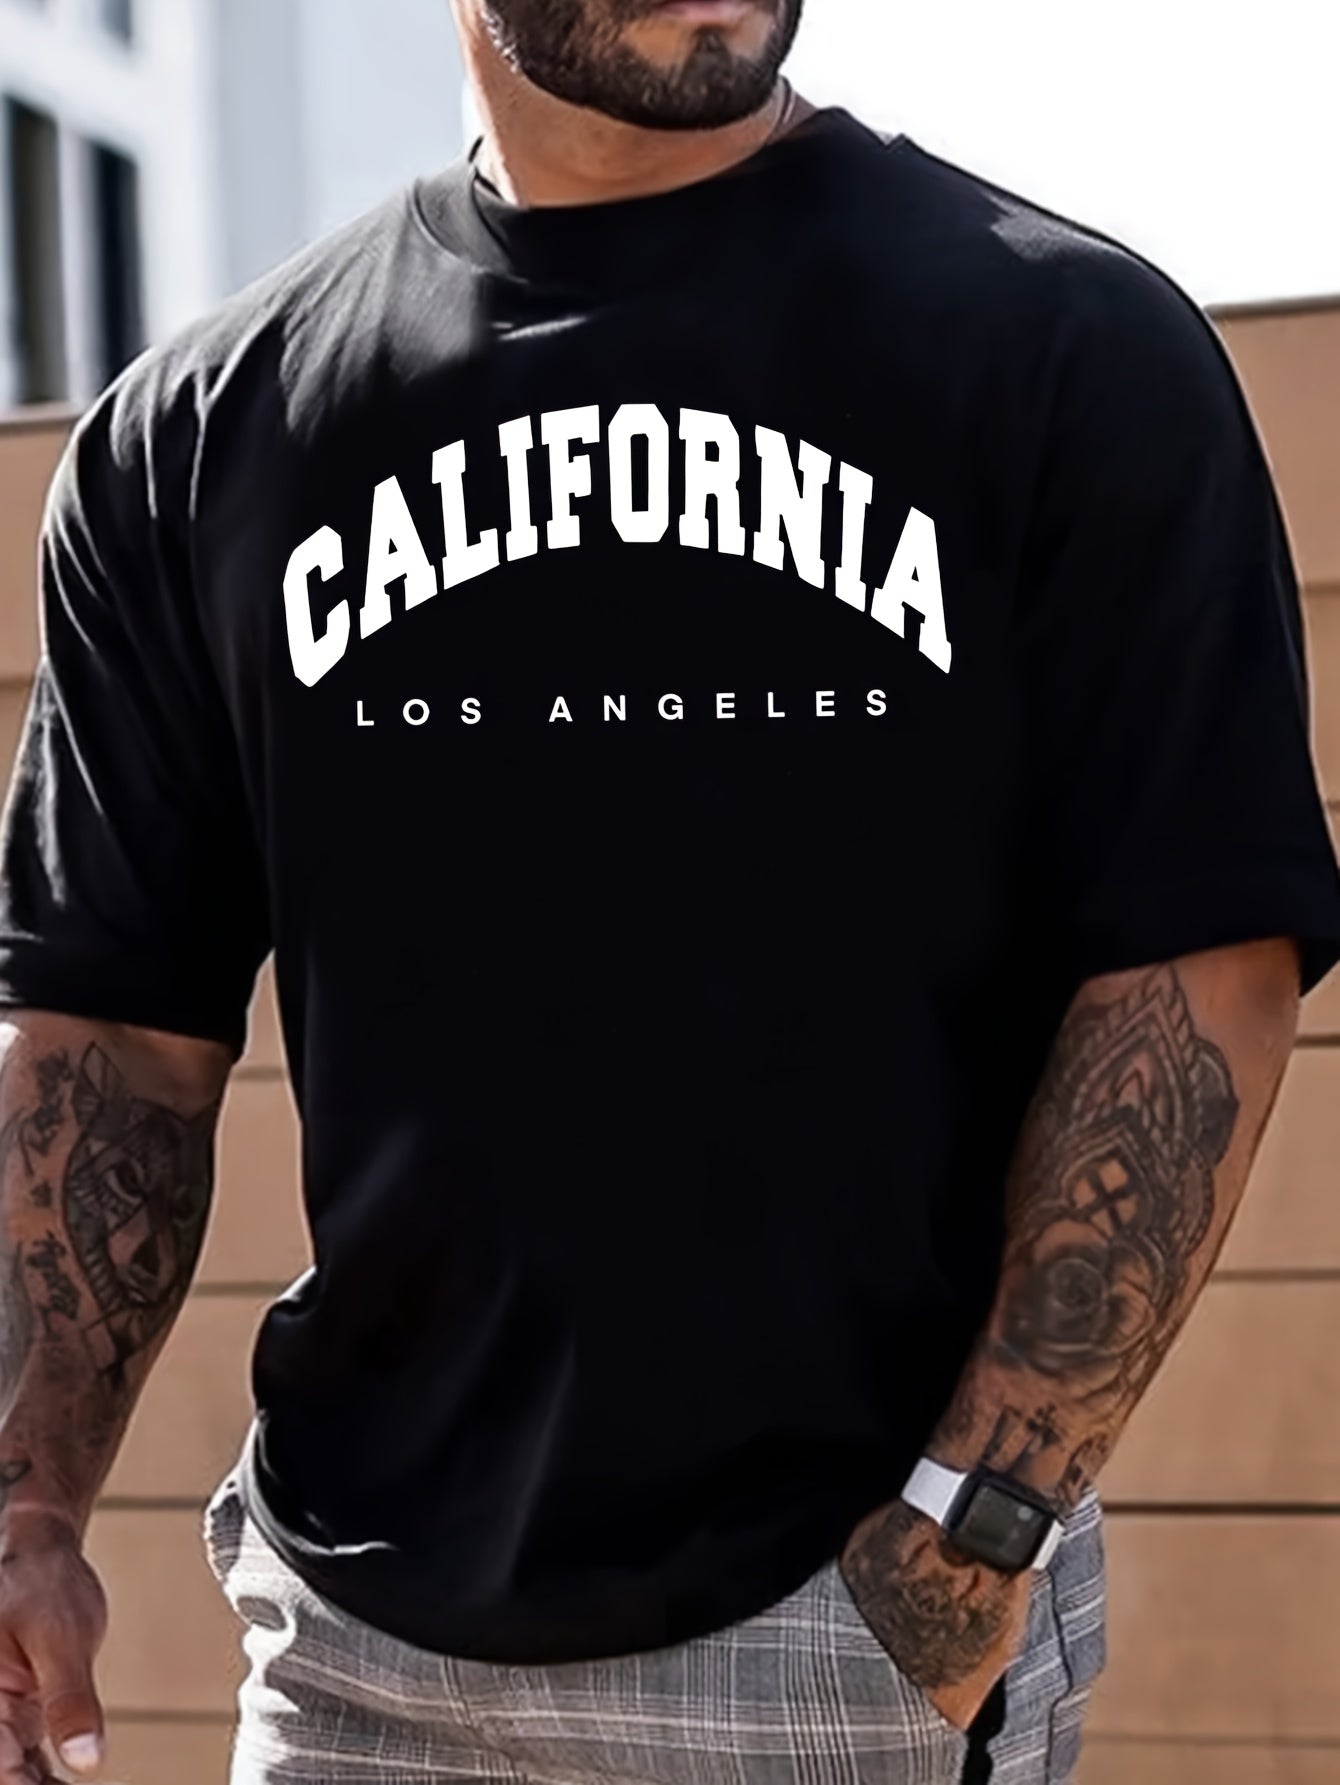 CALIFORNIA / Letter K  Print, Men's Graphic Design Crew Neck Active T-shirt, Casual Comfy Tees Tshirts For Summer, Men's Clothing Tops For Daily Vacation Workout Running Training